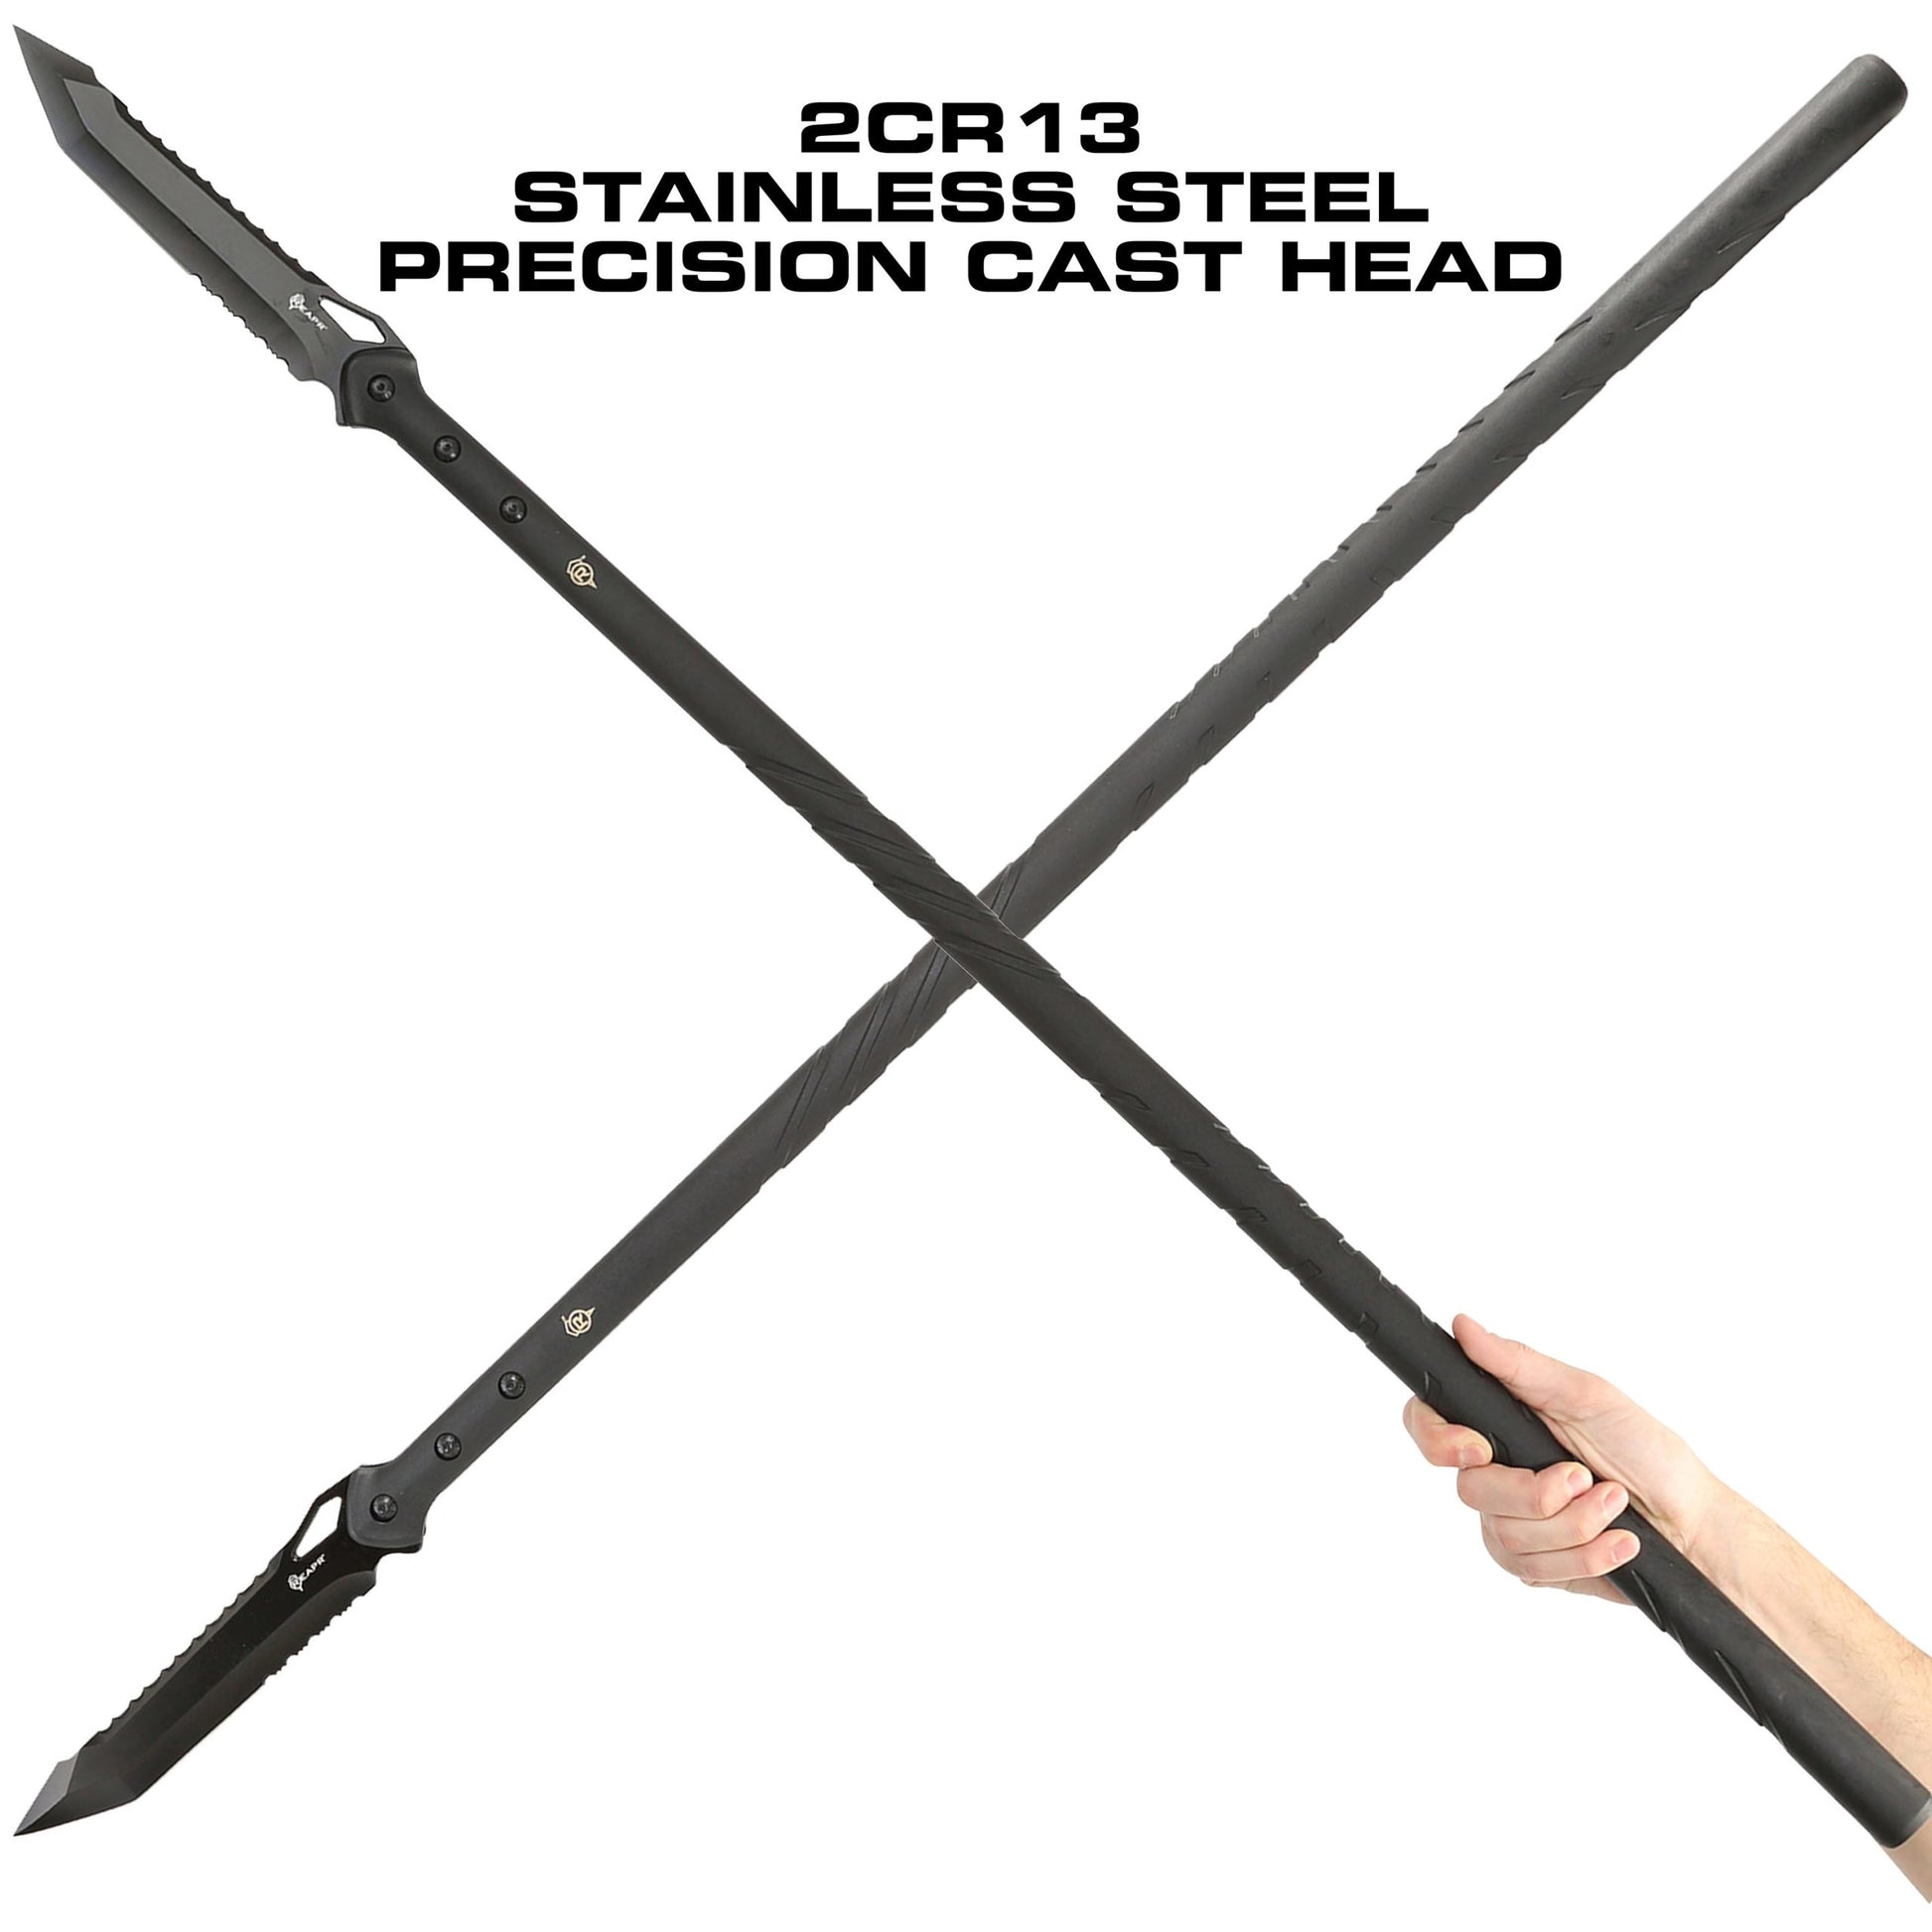 The outstanding REAPR 11022 TAC Javelin Serrated Spear cuts, chops, saws, and thrusts efficiently and effectively, giving you a javelin spear that functions equally as well as a utility tool. www.defenceqstore.com.au